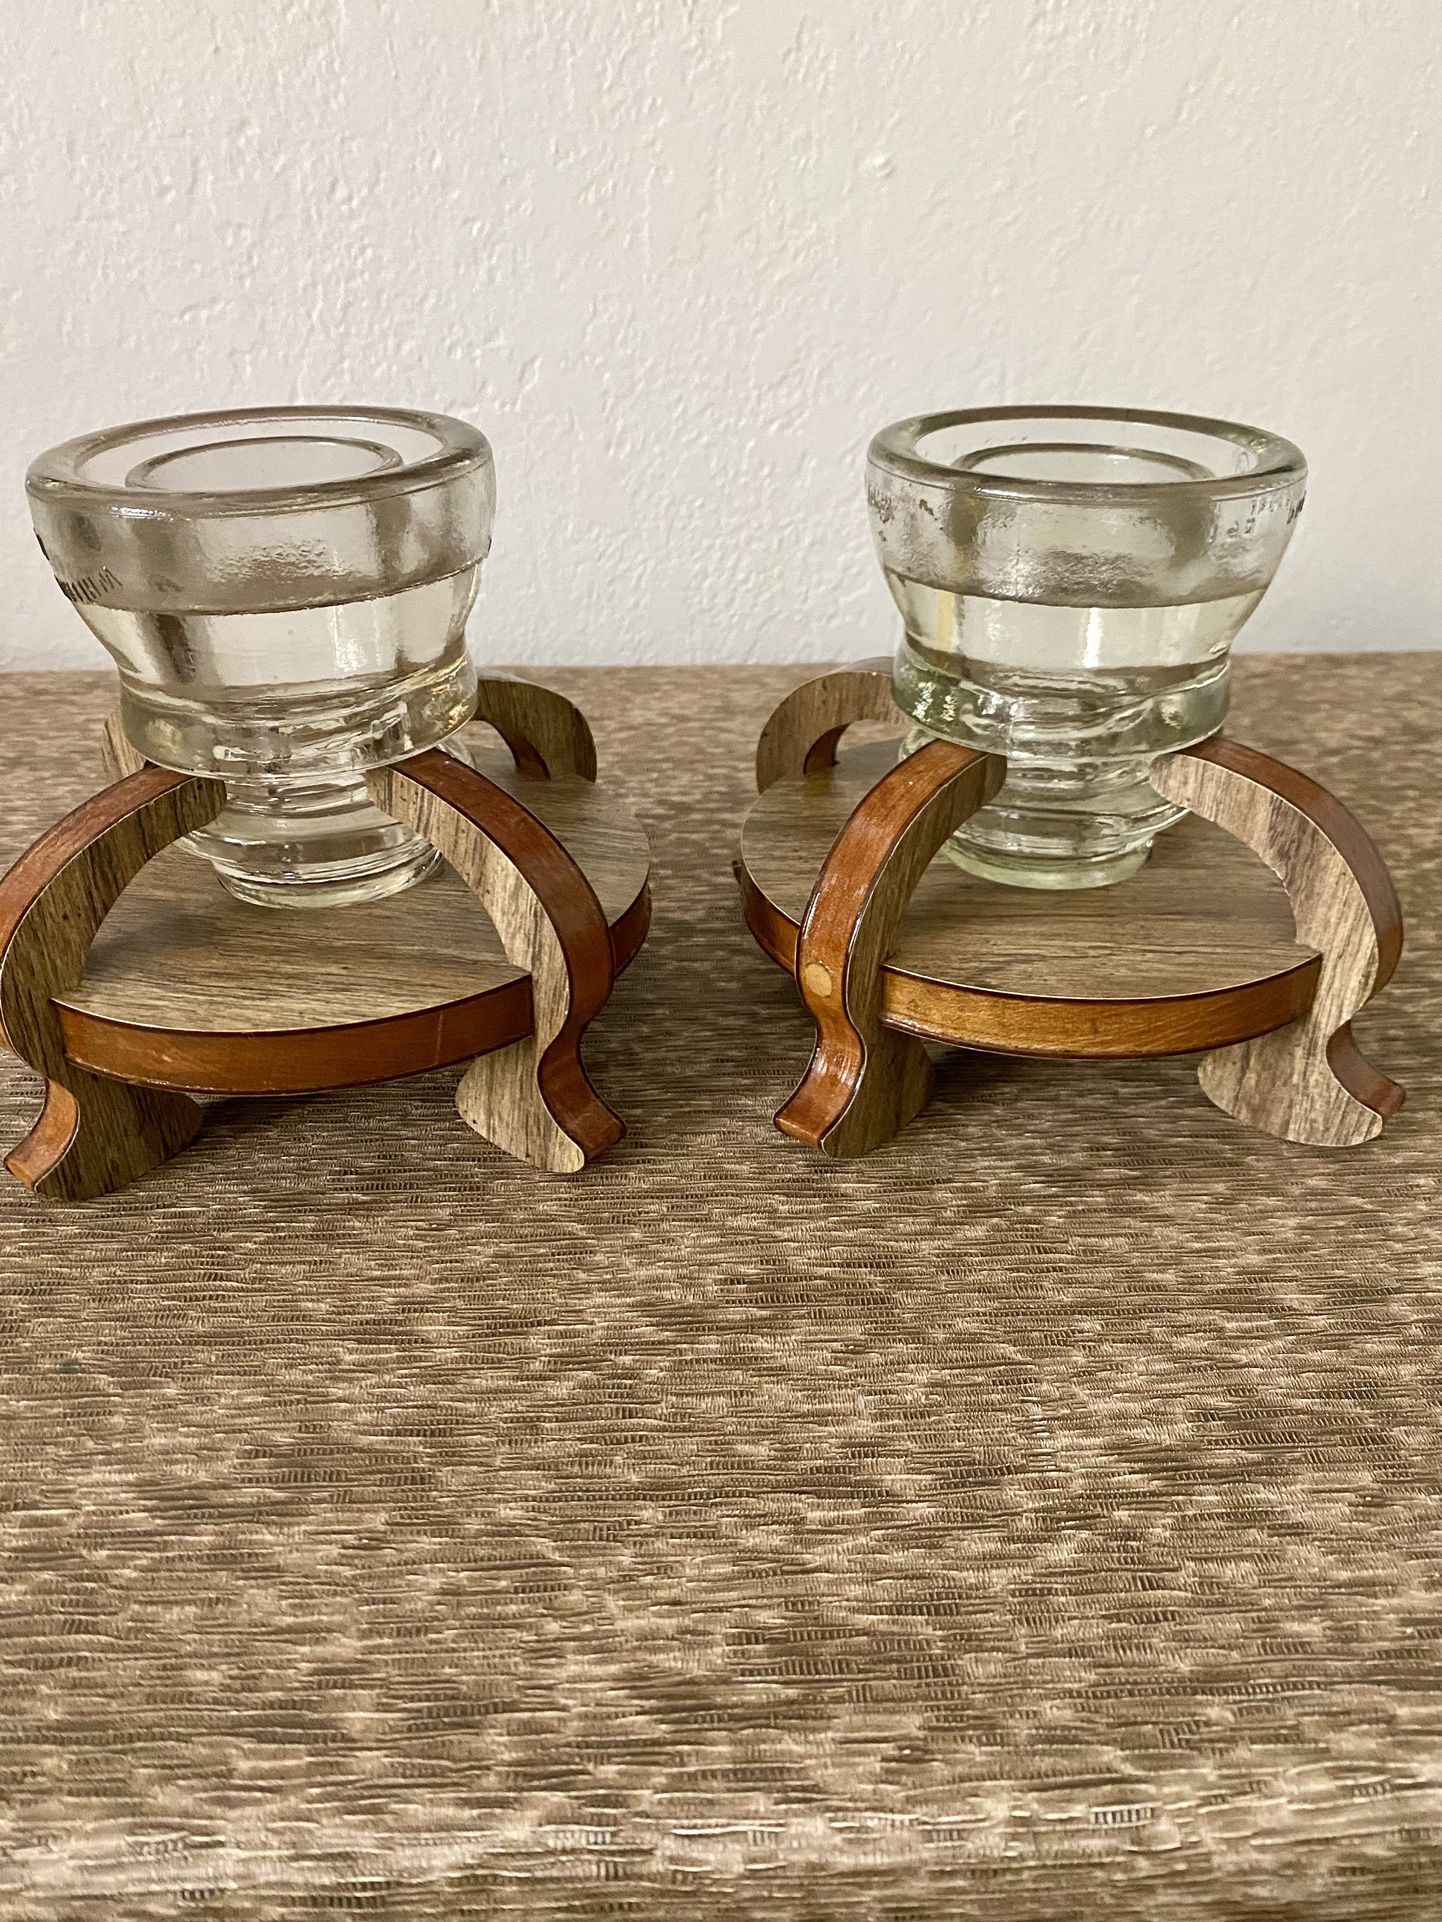 Pair of Unique Glass Insulator  Candle Holders —$15 Each